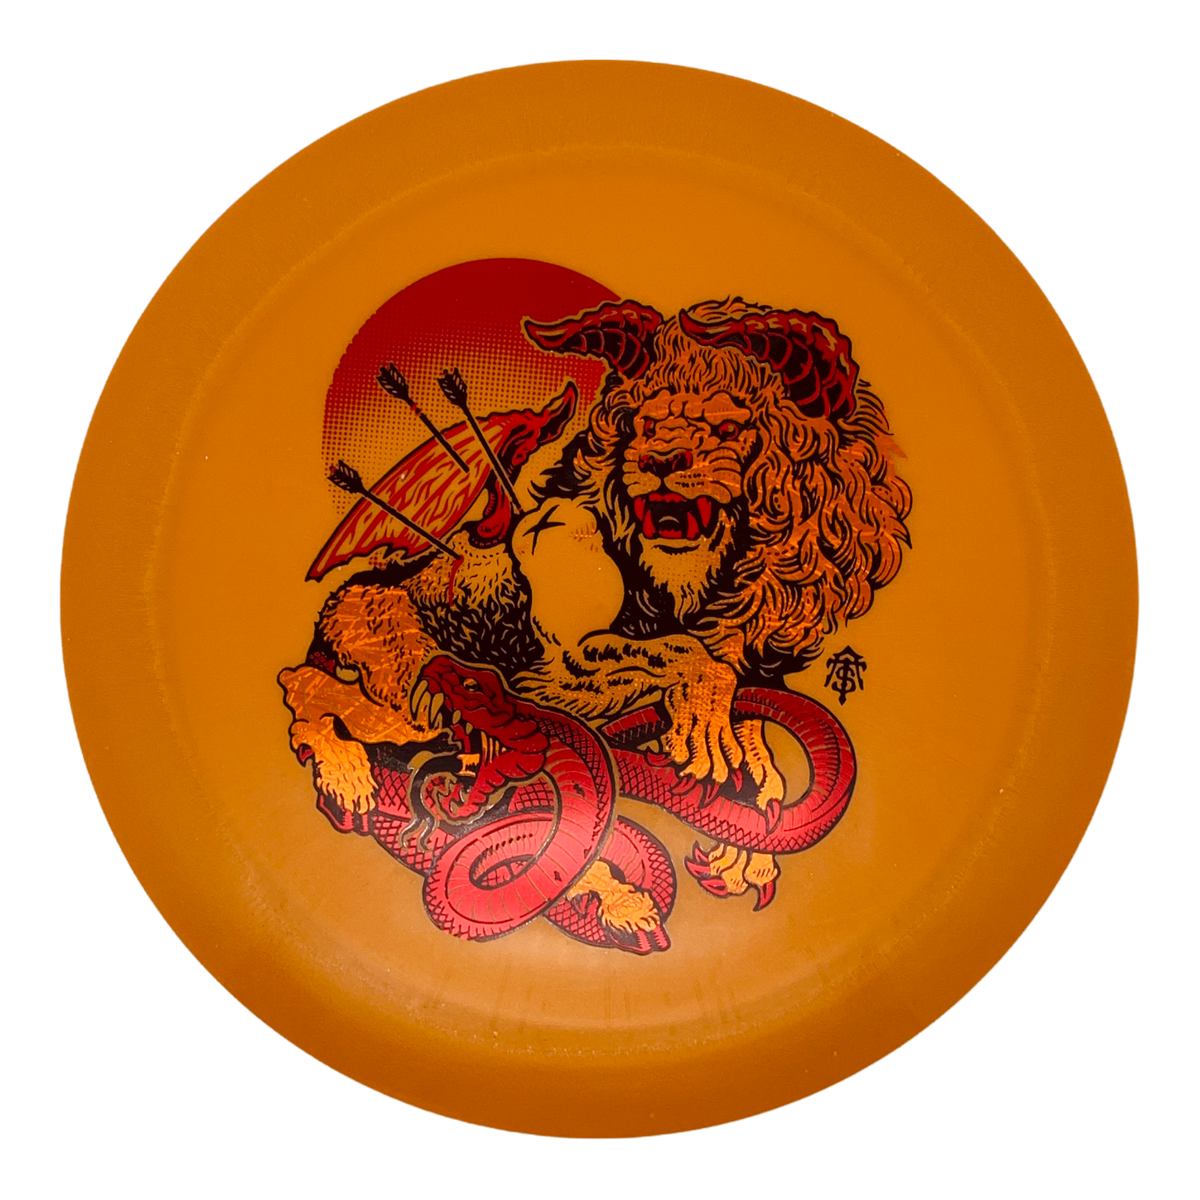 Infinite Discs G-Blend Emperor - Though Space Stamp